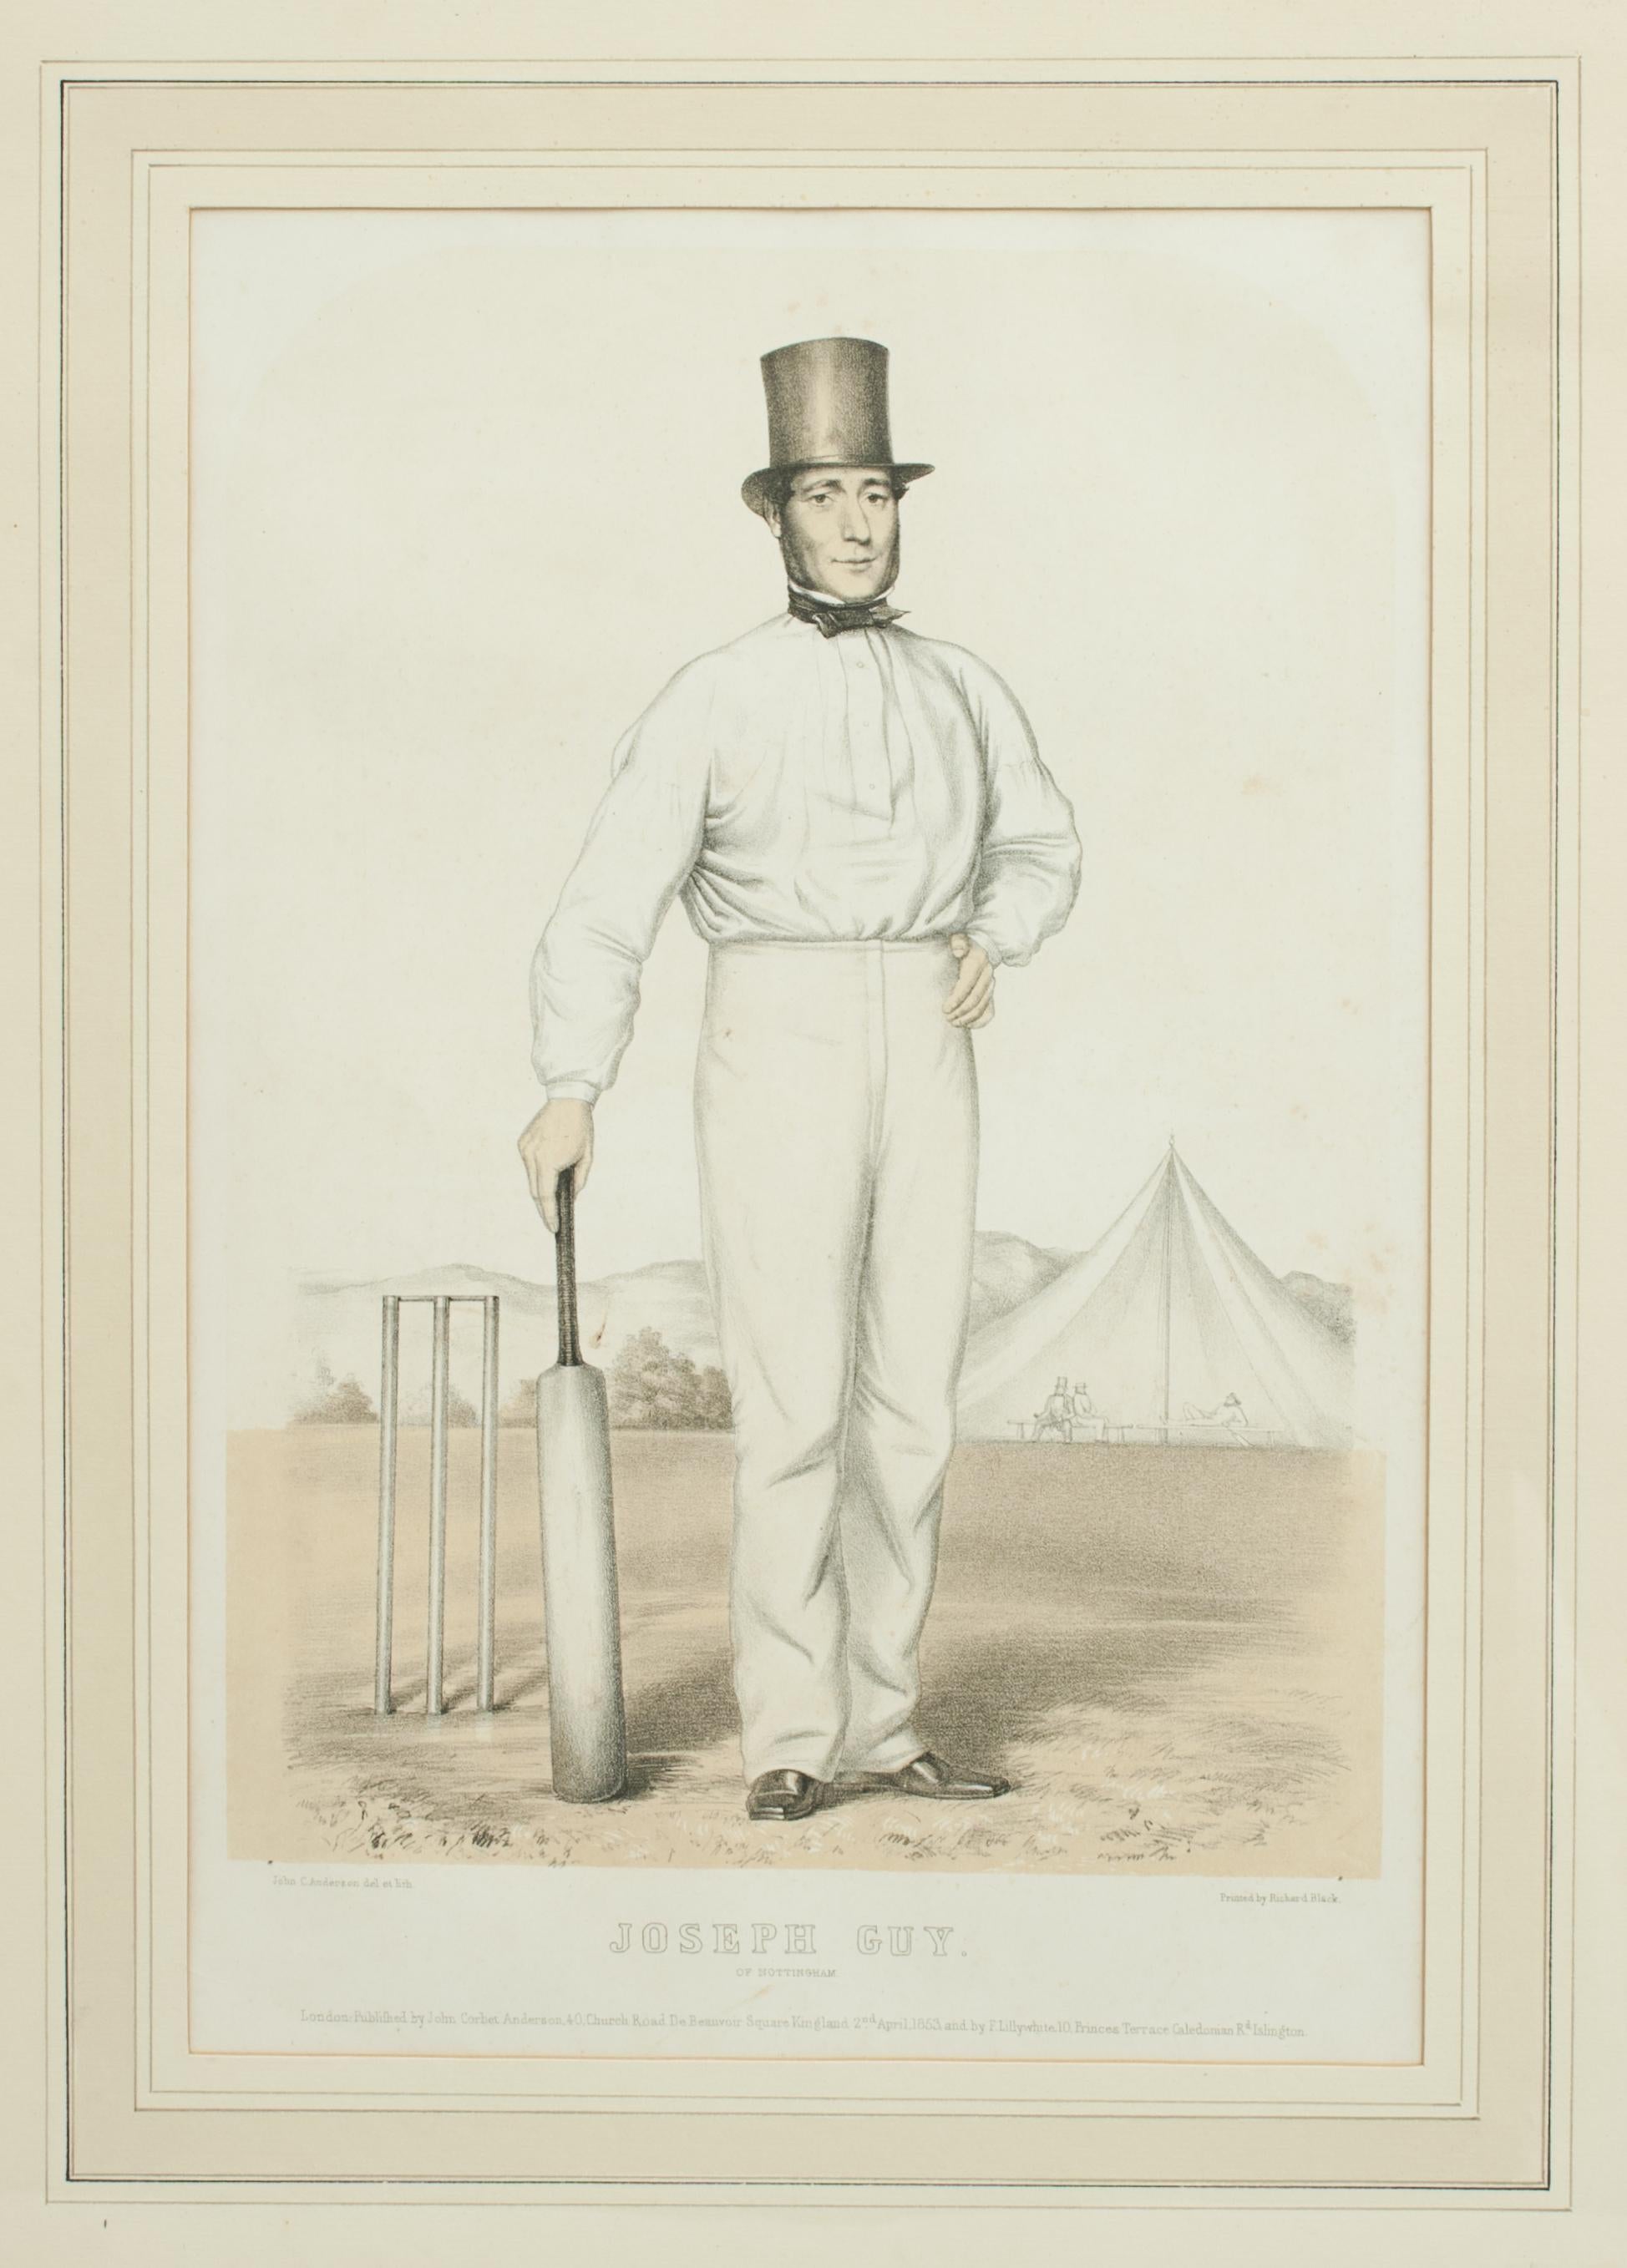 Cricket print of Joseph Guy of Nottingham.
A framed, tinted and hand colored lithographic portrait of the All- England cricketer Joseph Guy (1813 - 1873) of Nottingham after John Corbet Anderson. Printed by Richard Black and published by Anderson &